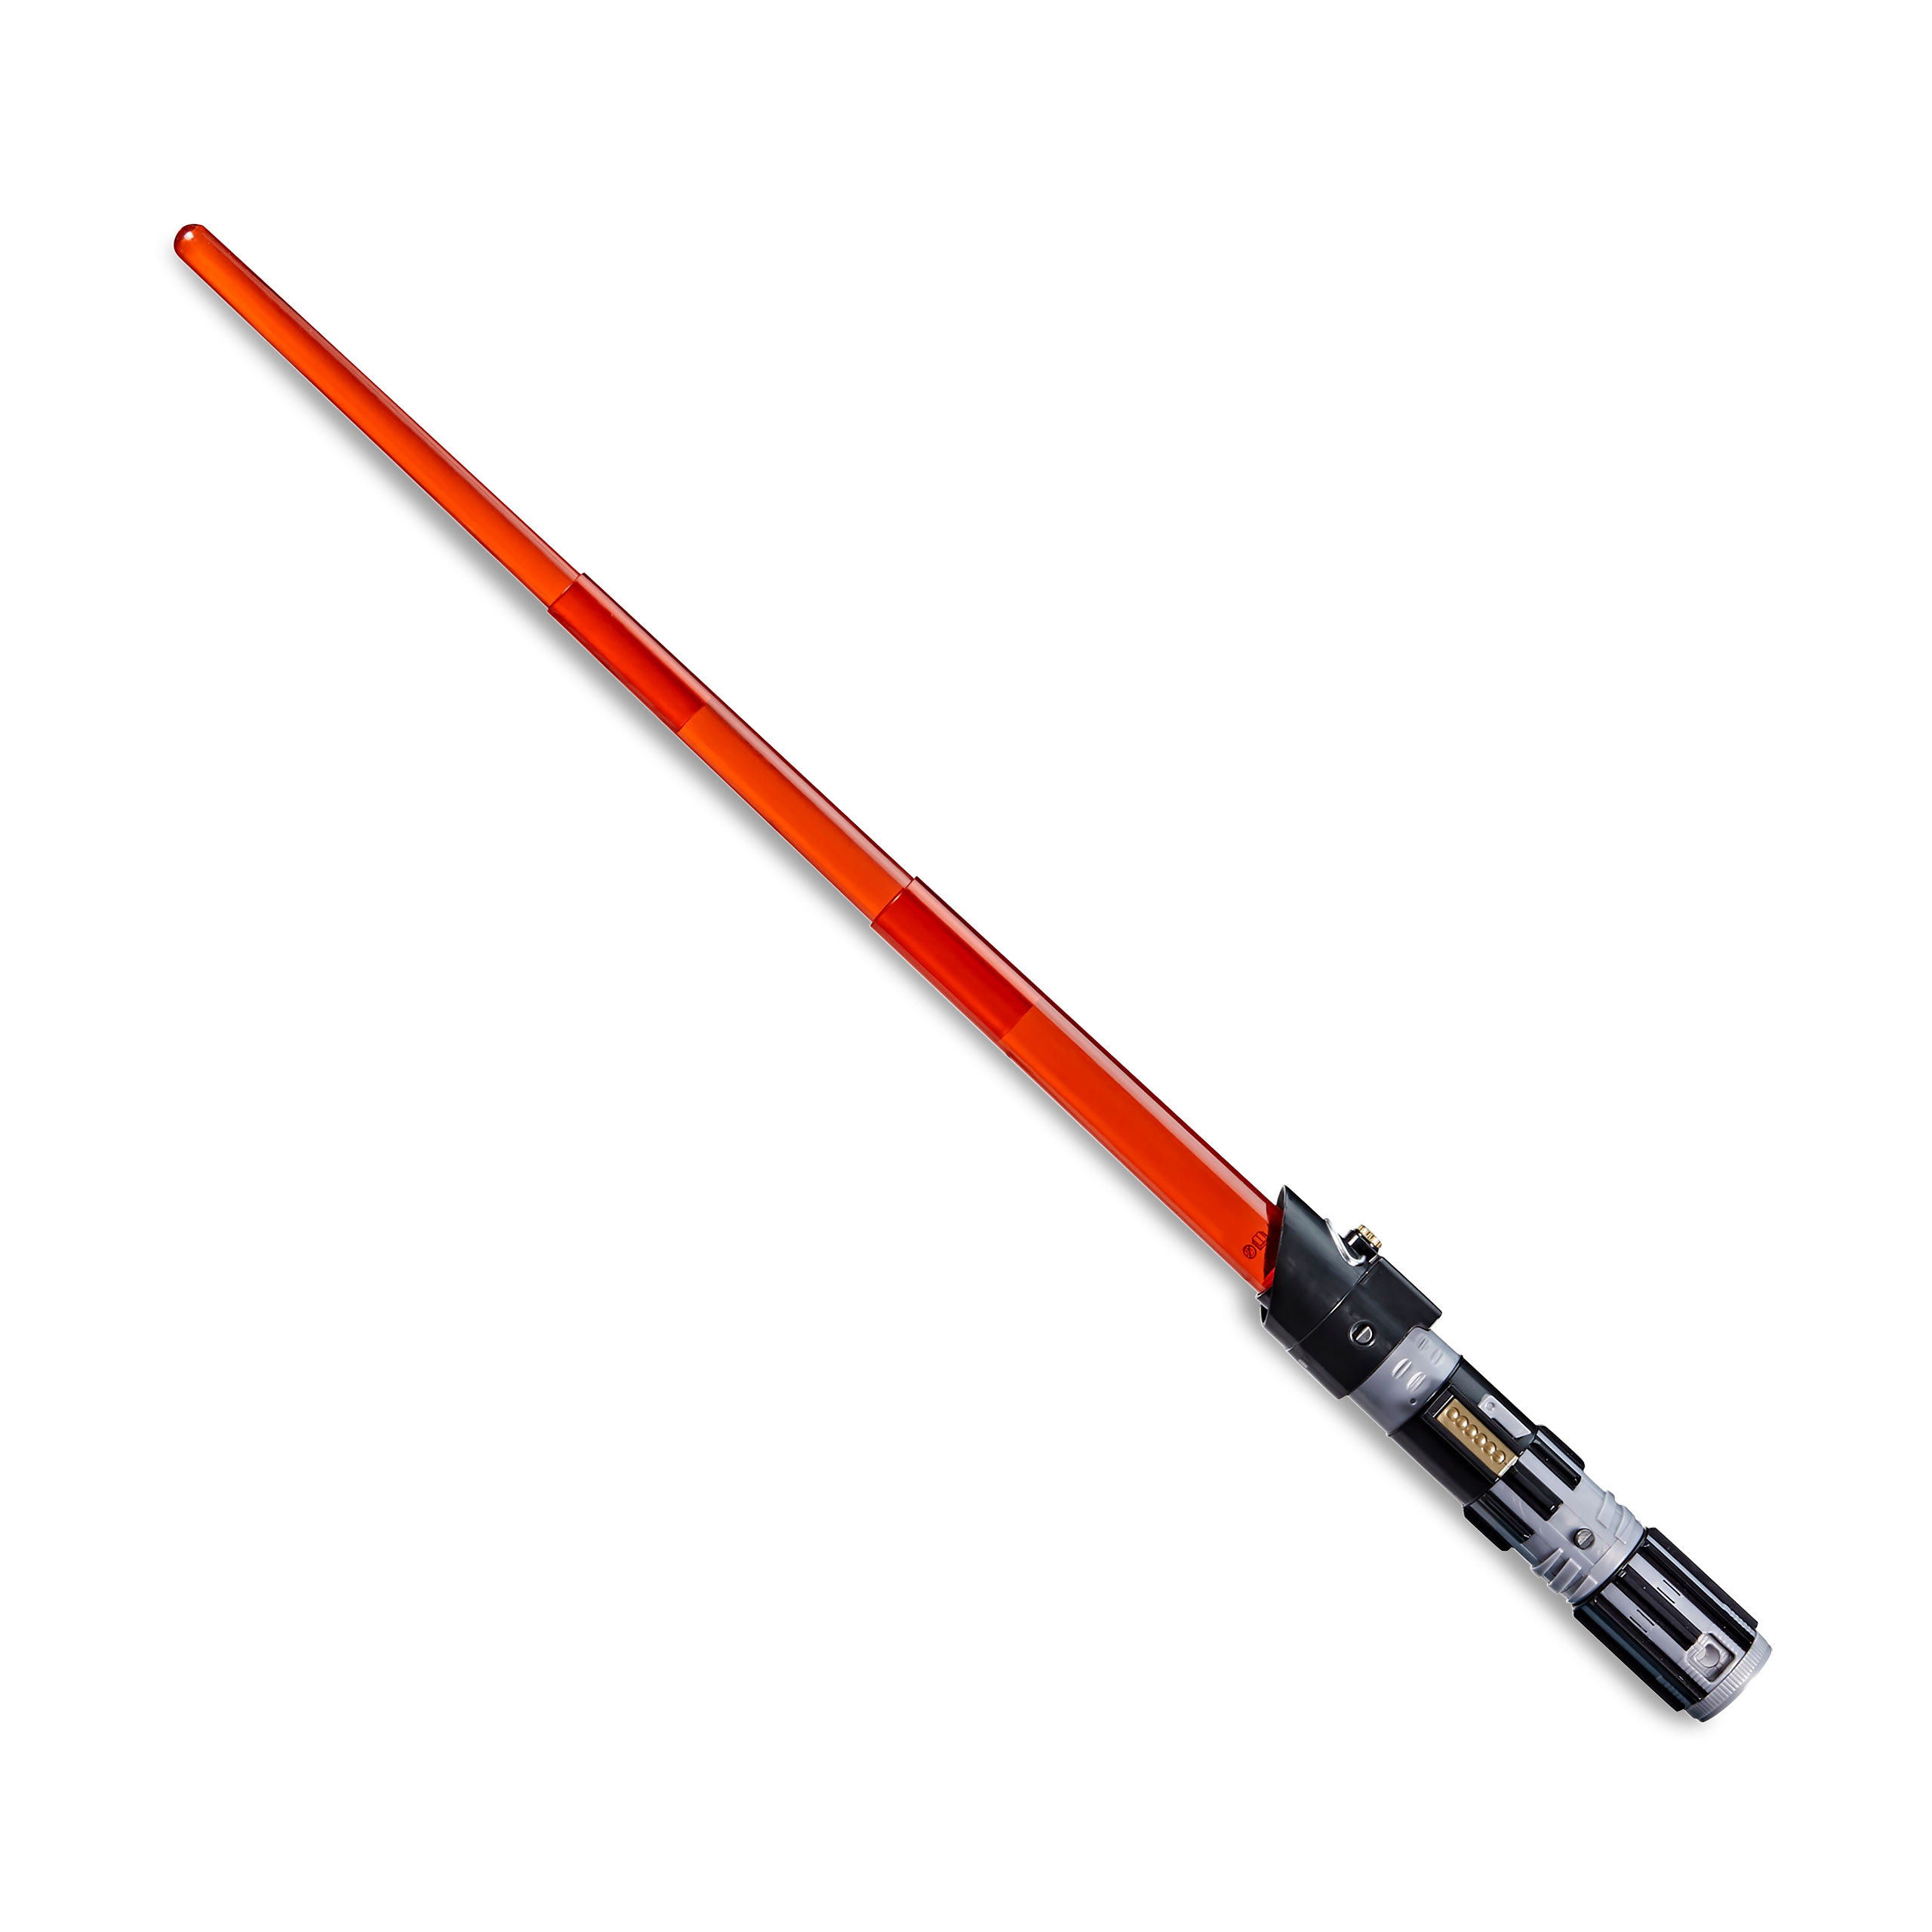 Star Wars - Darth Vader Forge Lightsaber with Light and Sound Effect